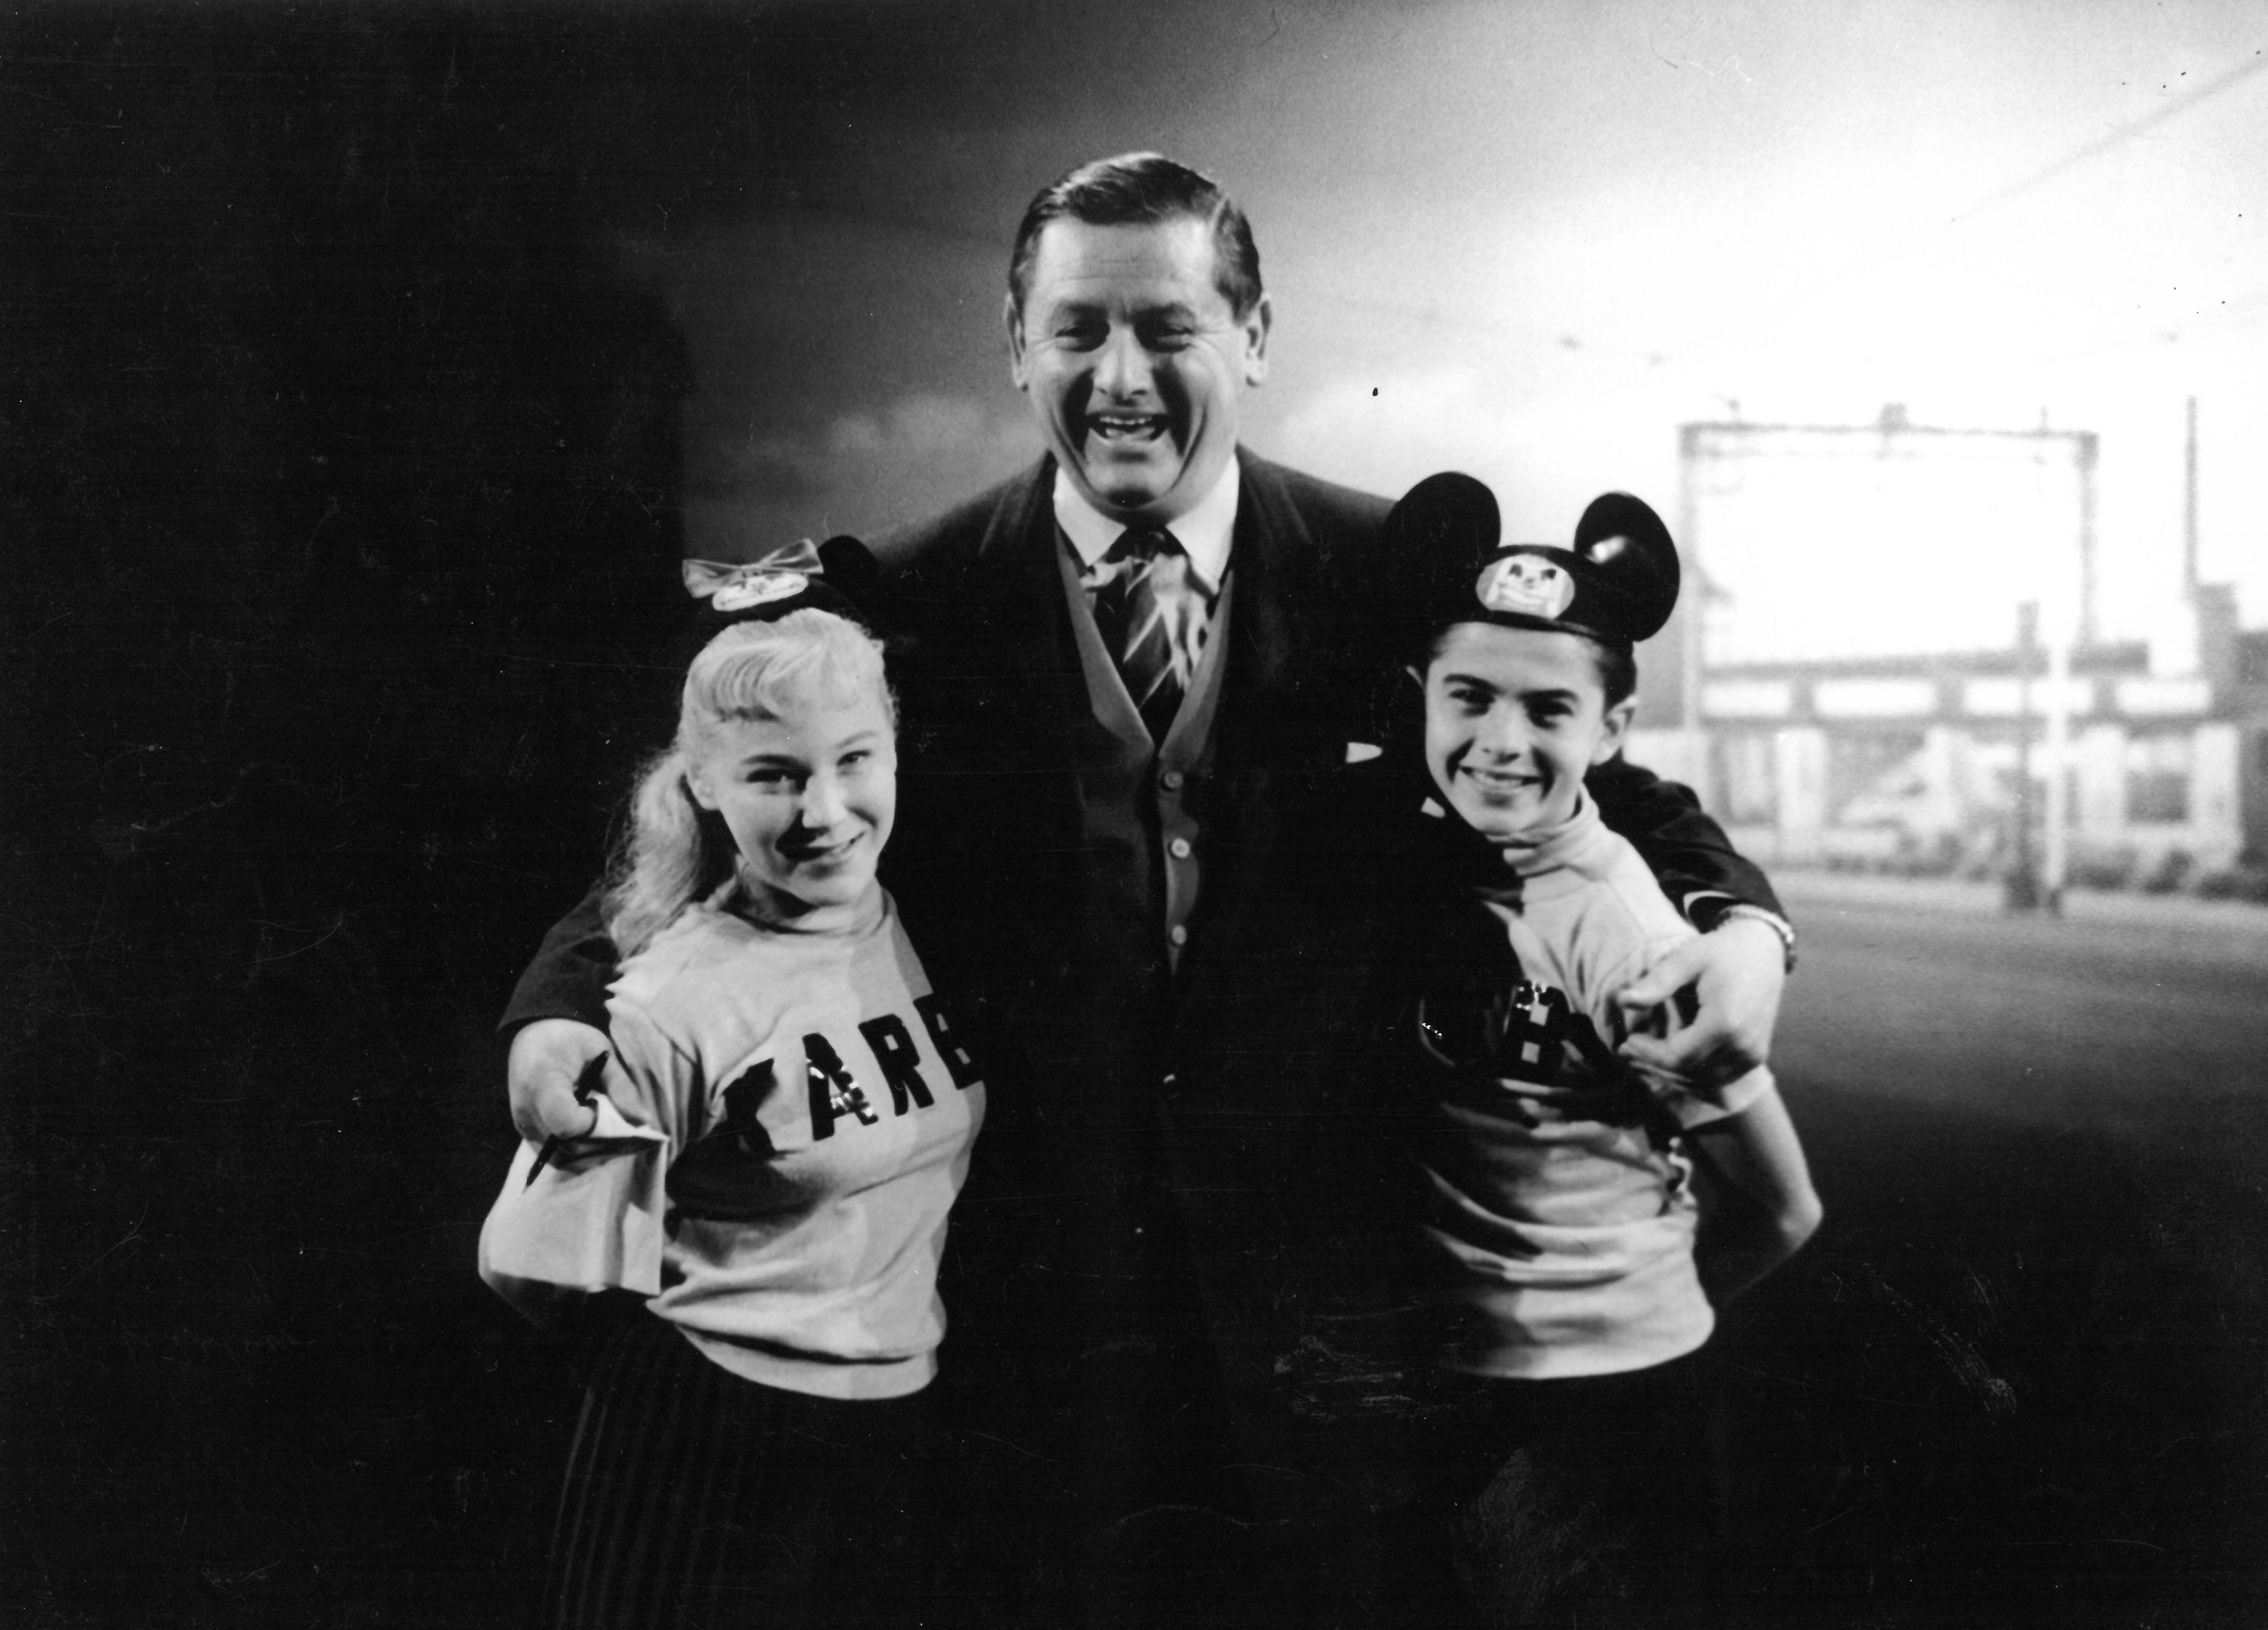 black and white photo of two mousekteers with a man